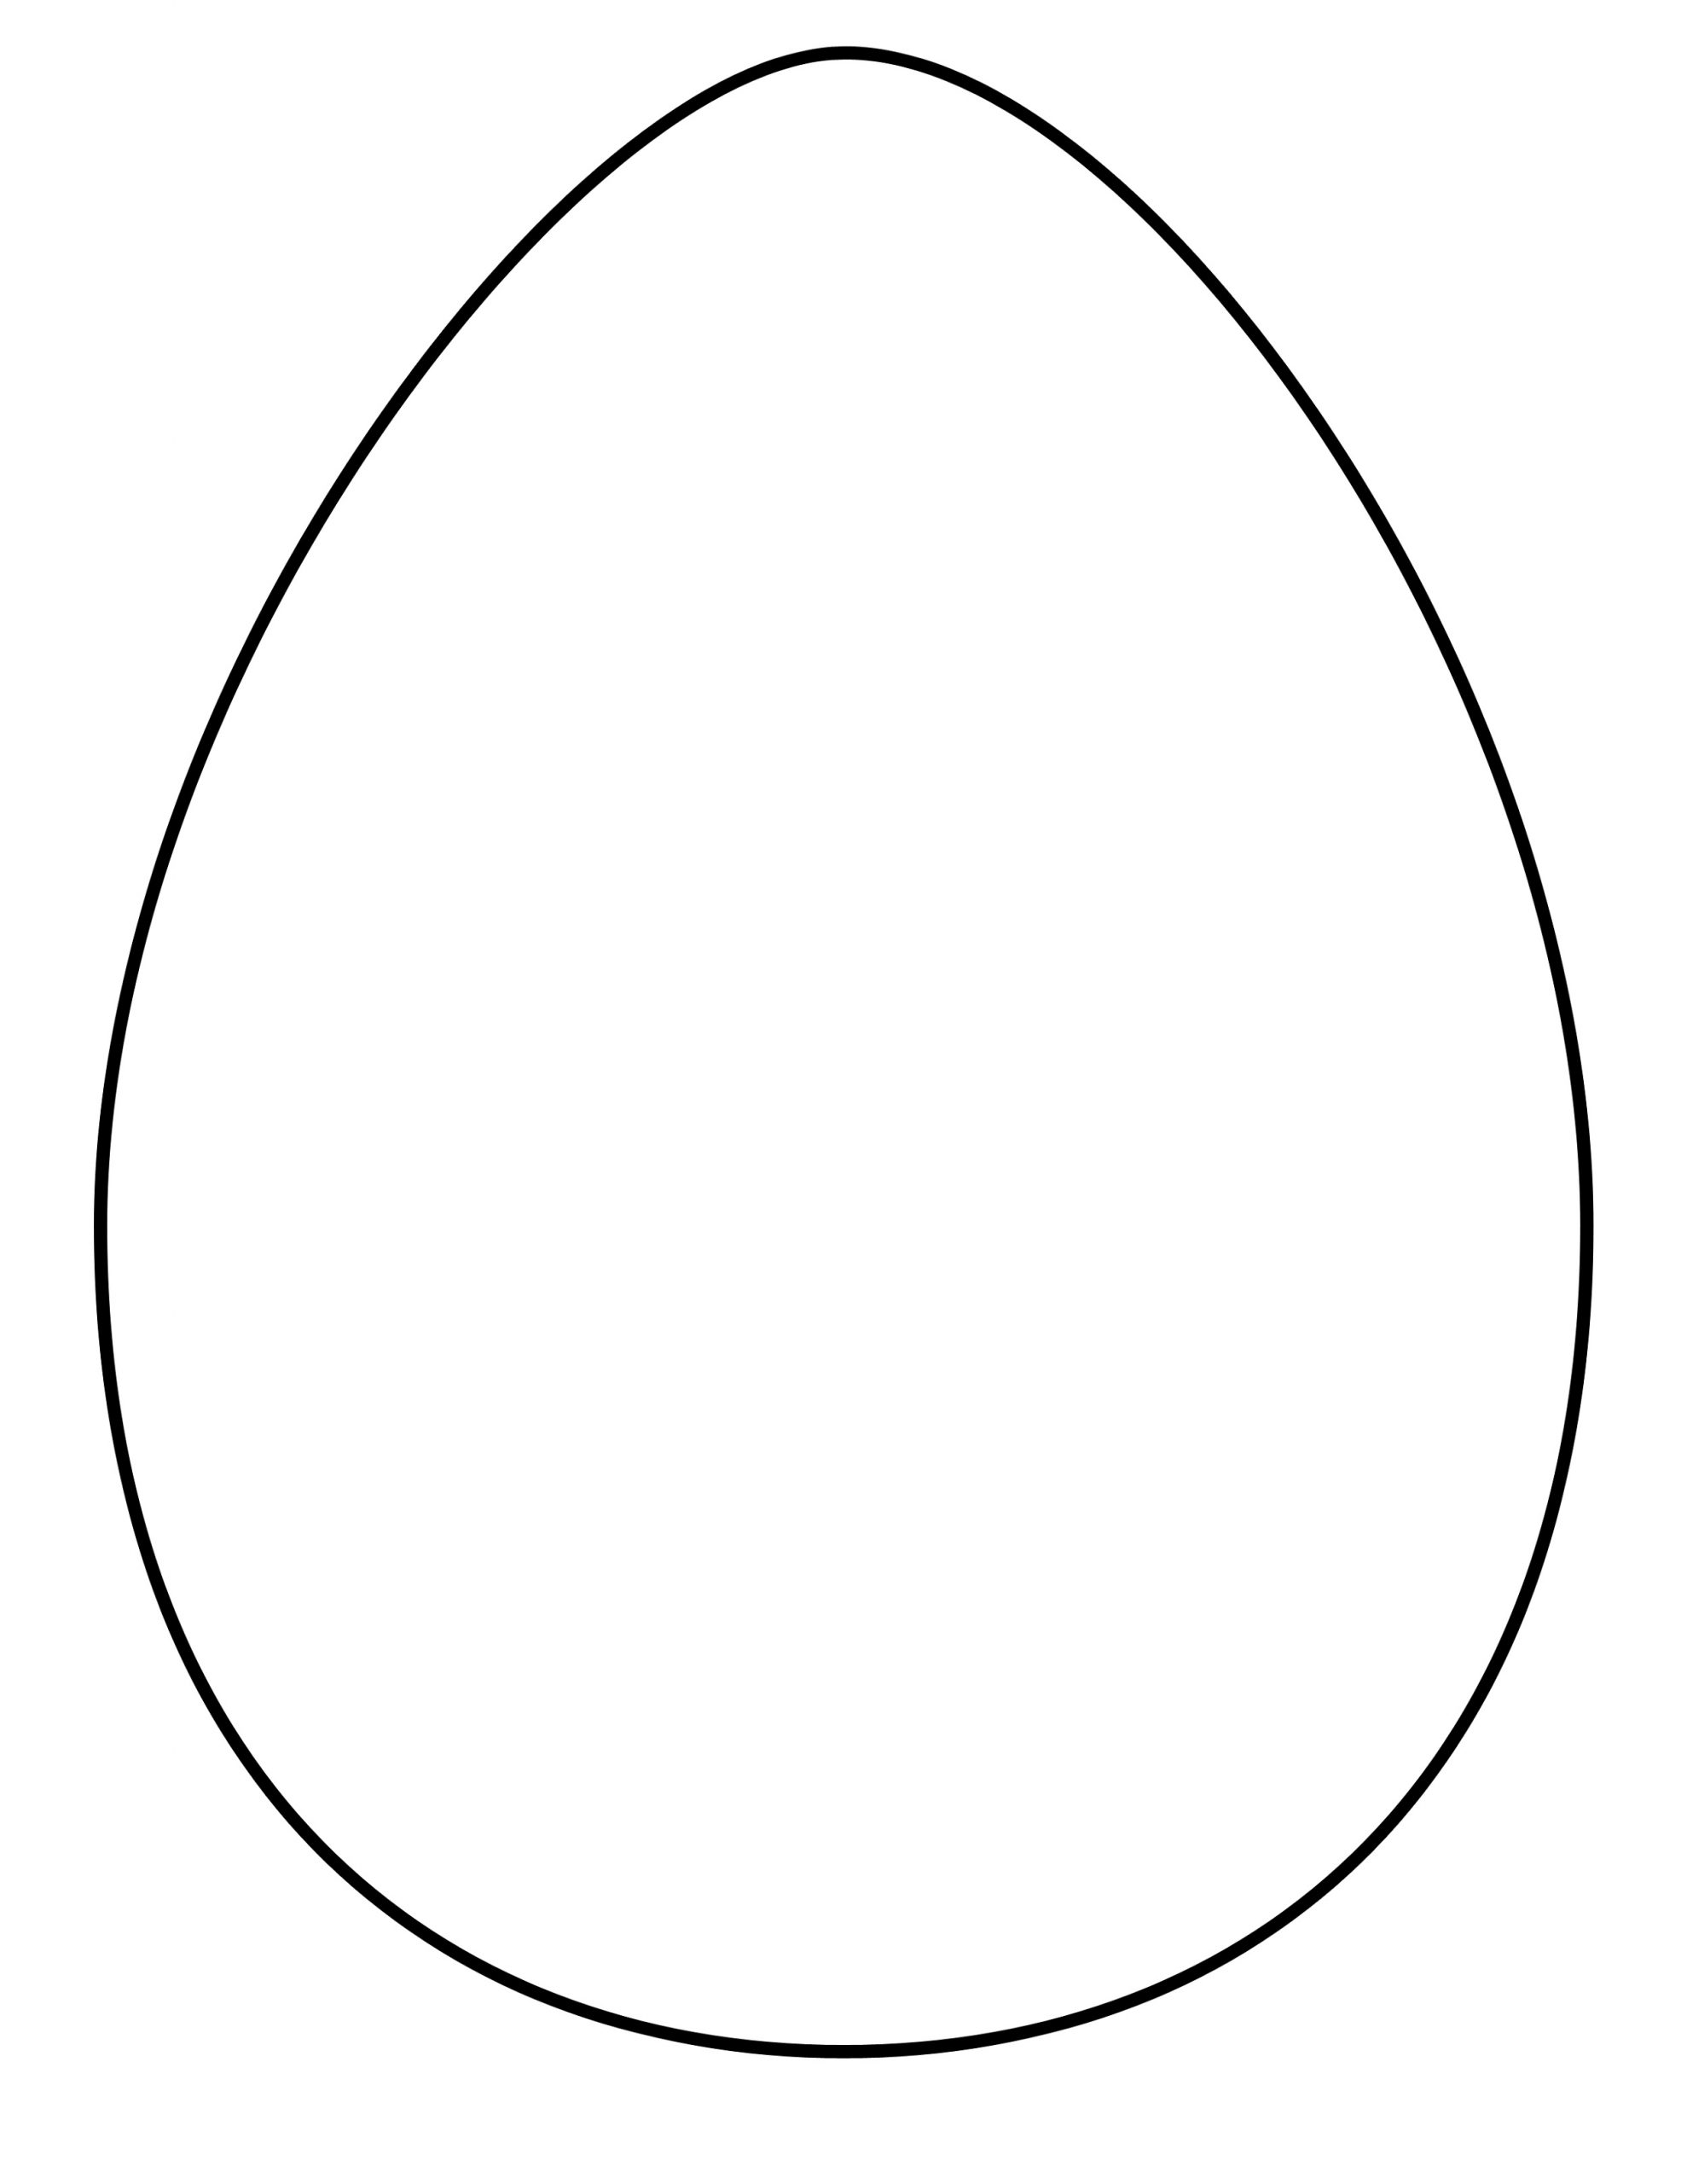 Printable Blank Easter Egg Templates 101 Activity